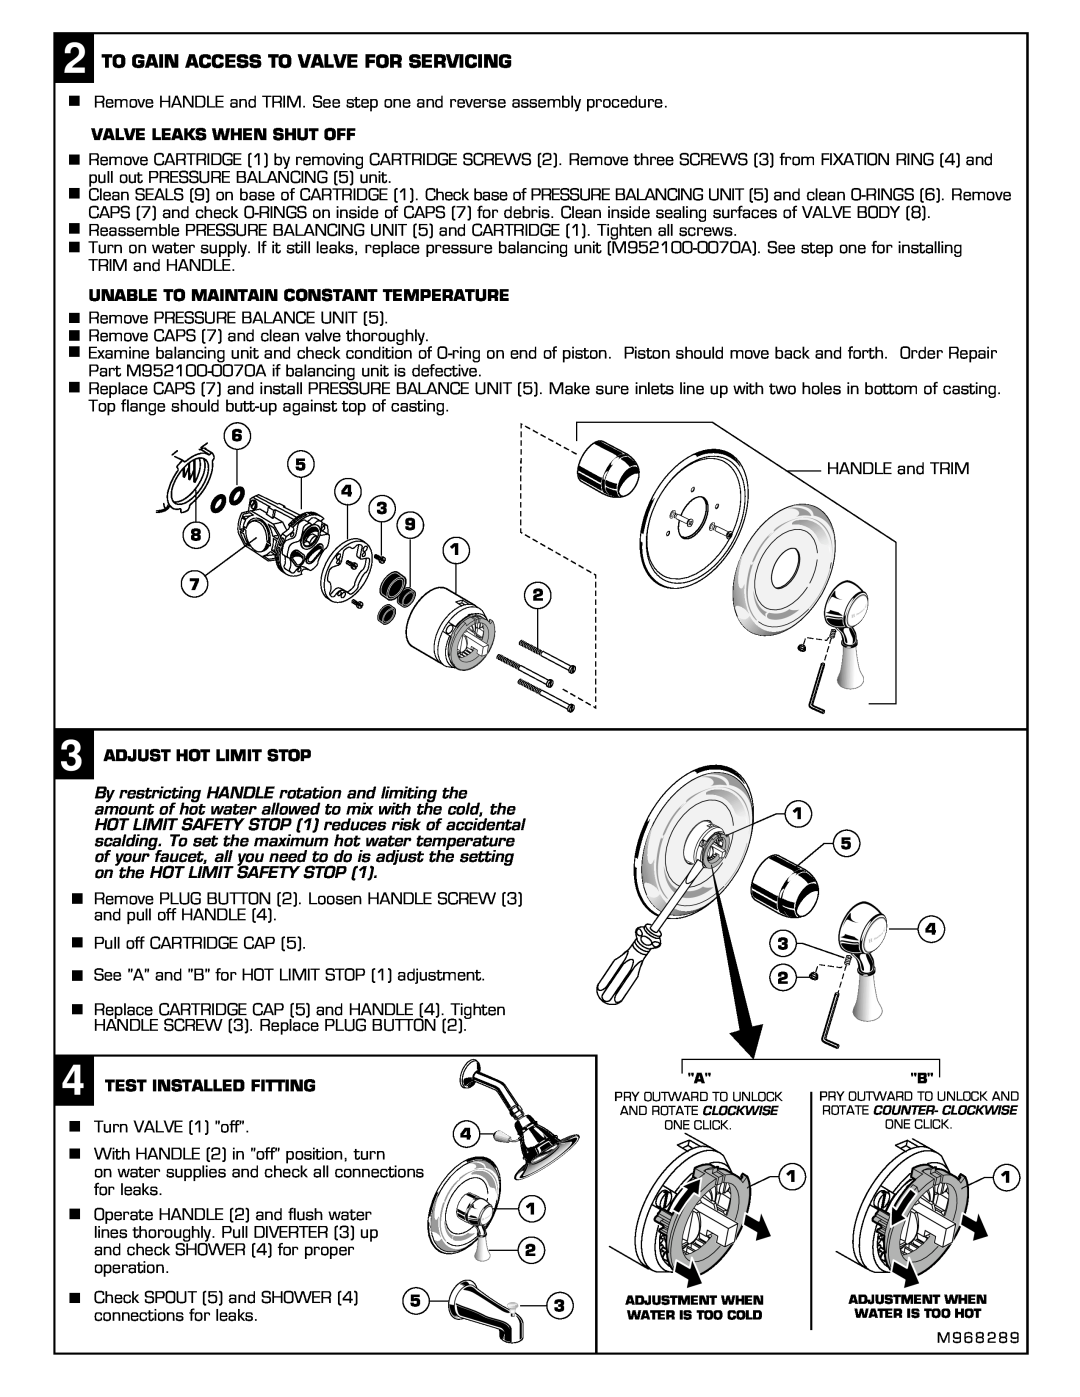 American Standard T6281, T6280, T6282 installation instructions To Gain Access To Valve For Servicing 